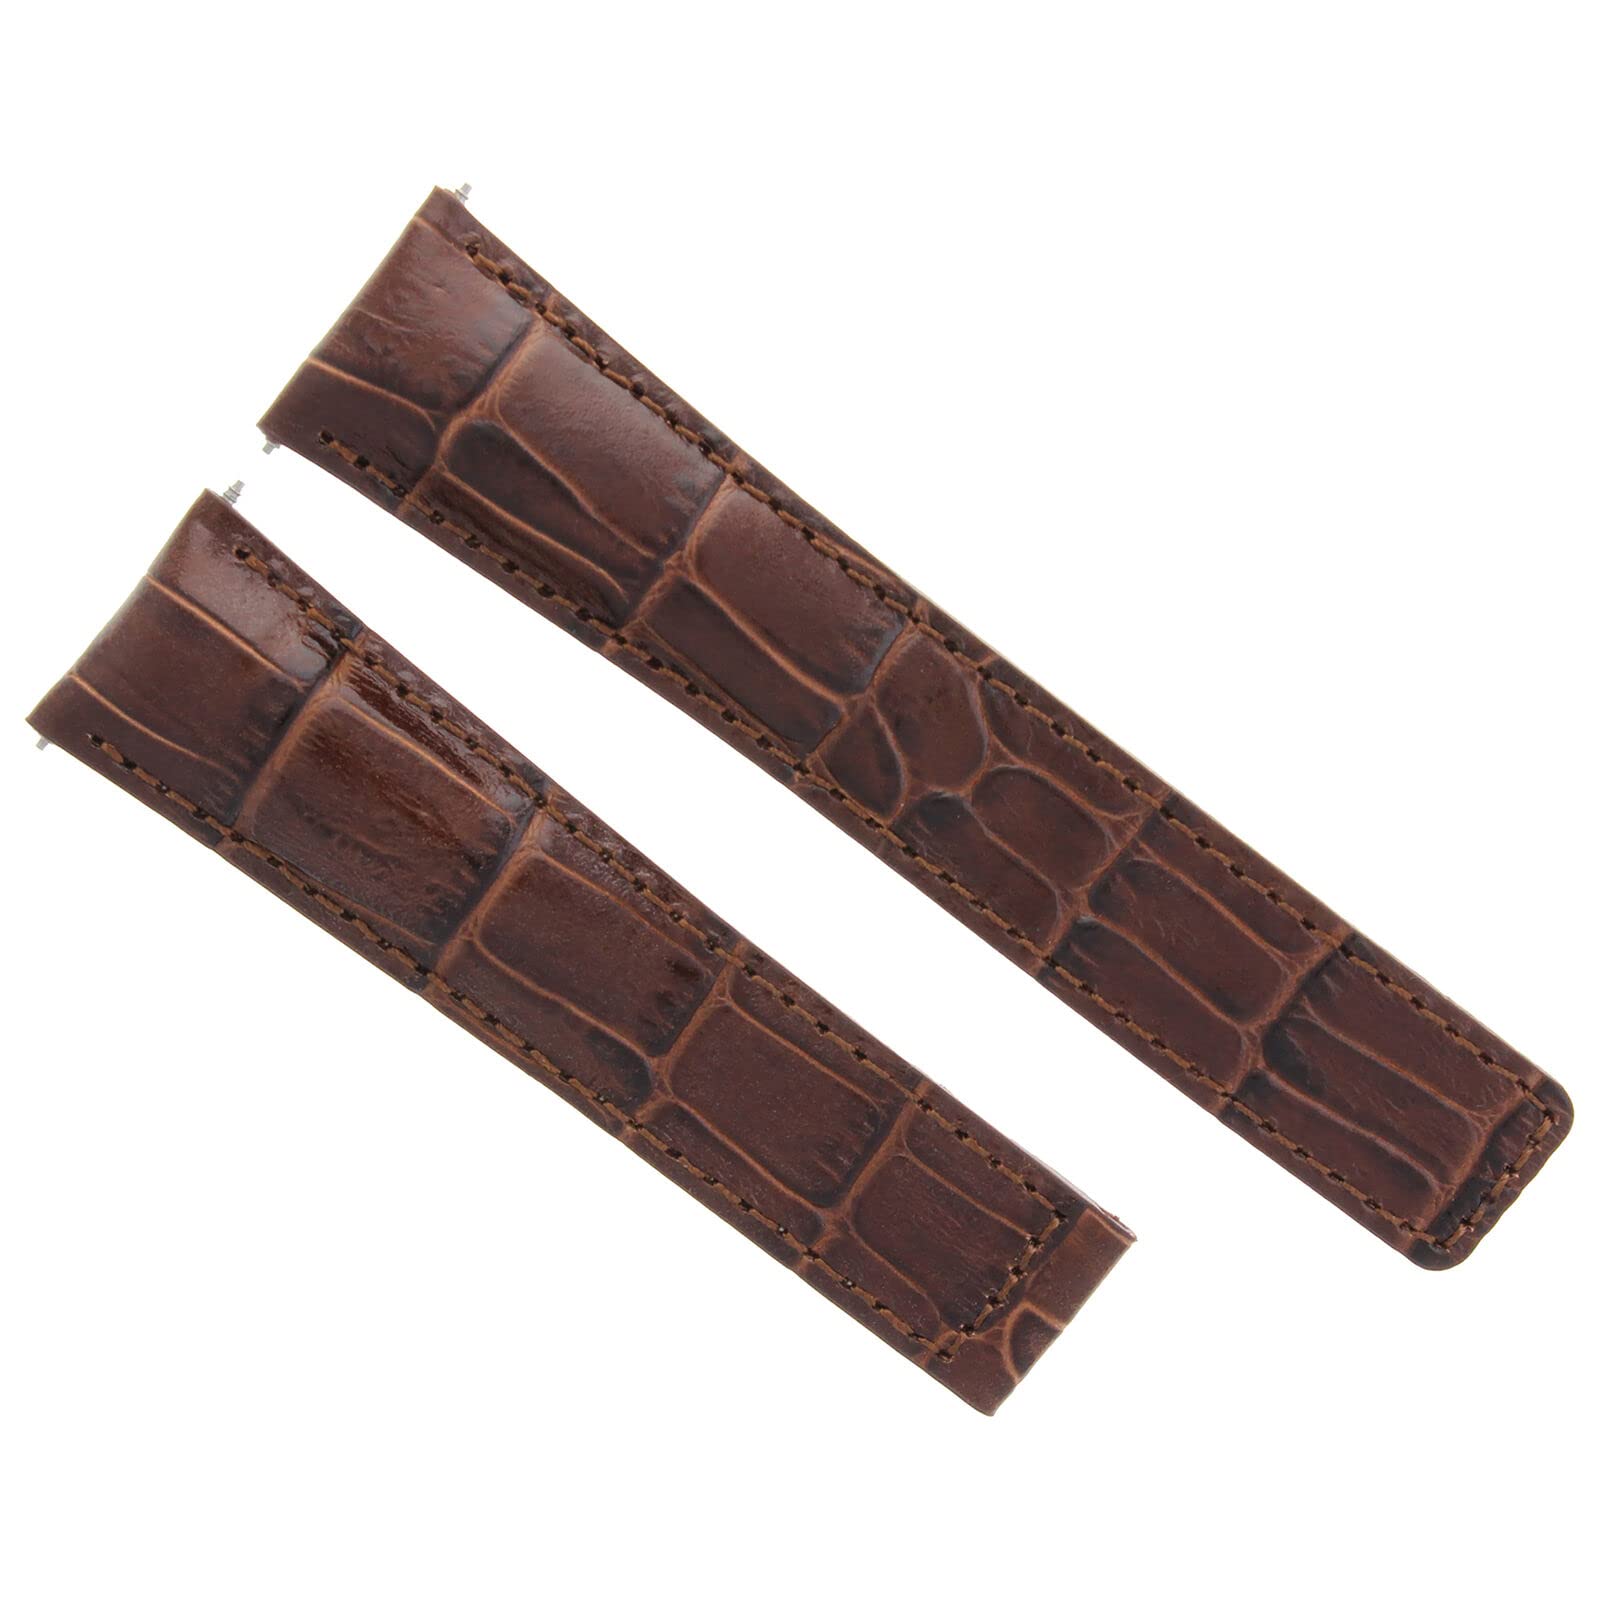 Ewatchparts 19MM LEATHER STRAP BAND DEPLOYMENT CLASP COMPATIBLE WITH TAG HEUER CARRERA CV2110 BROWN 3T